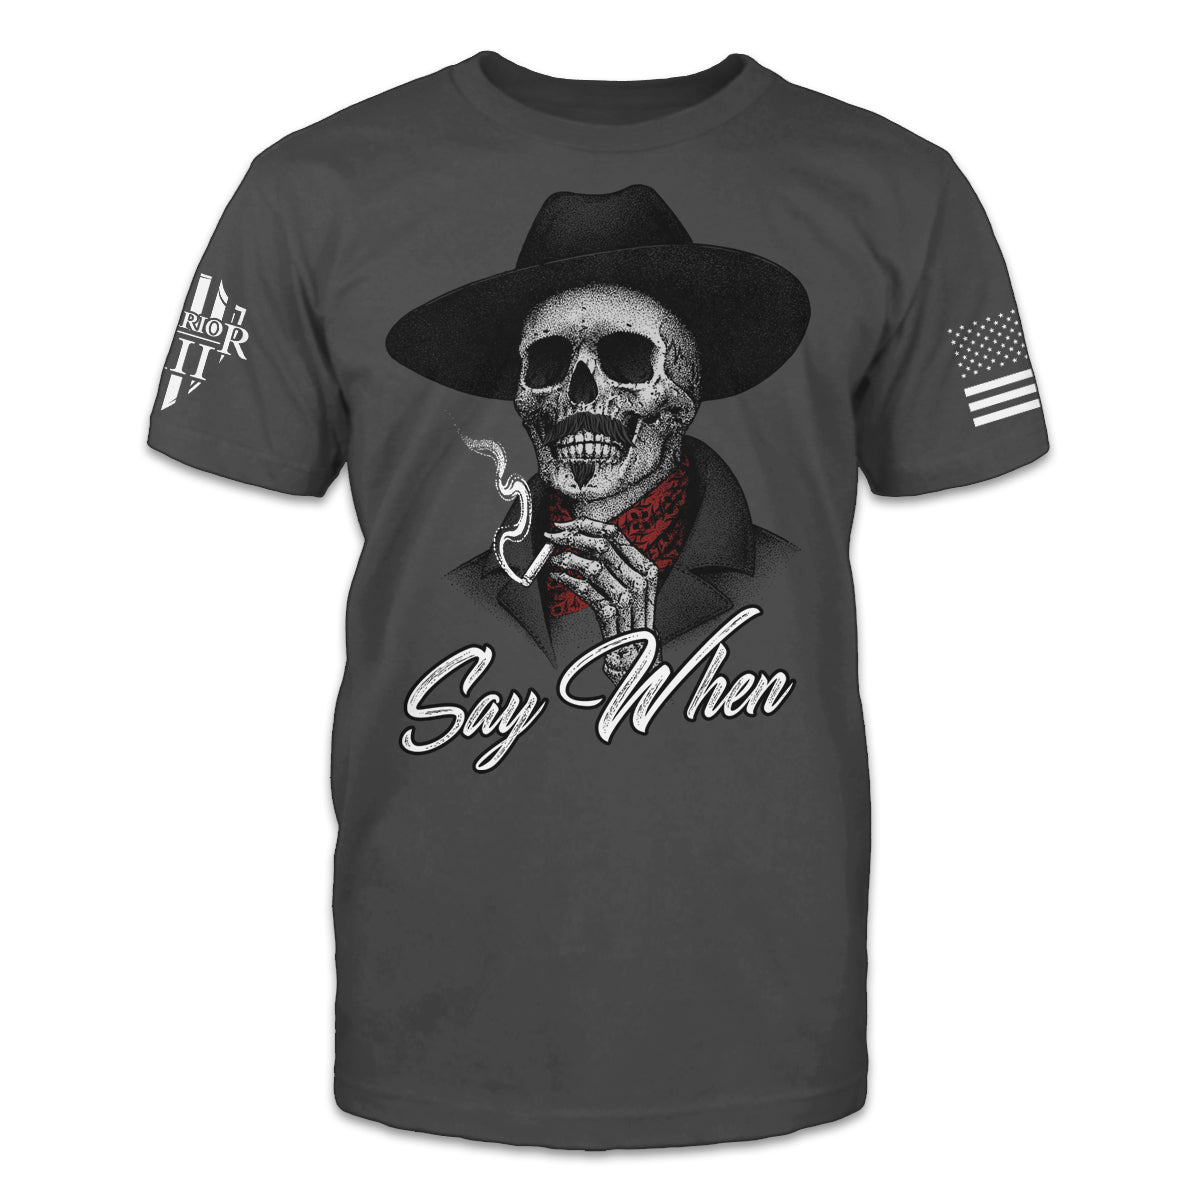 A dark grey t-shirt with the words "Say When" with a skeleton smoking a cigarette printed on the front of the shirt.